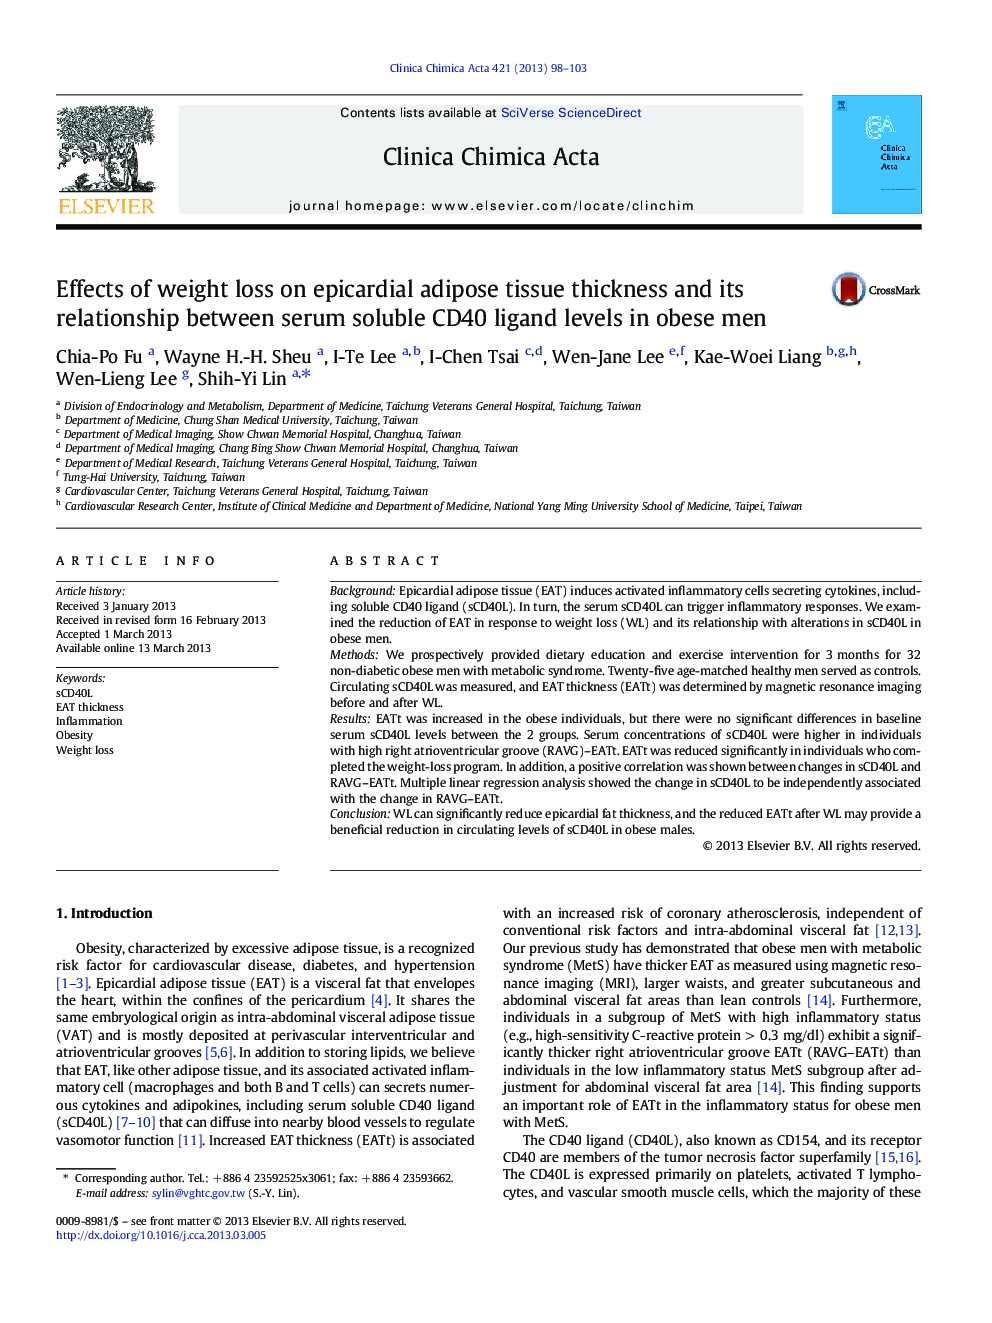 Effects of weight loss on epicardial adipose tissue thickness and its relationship between serum soluble CD40 ligand levels in obese men